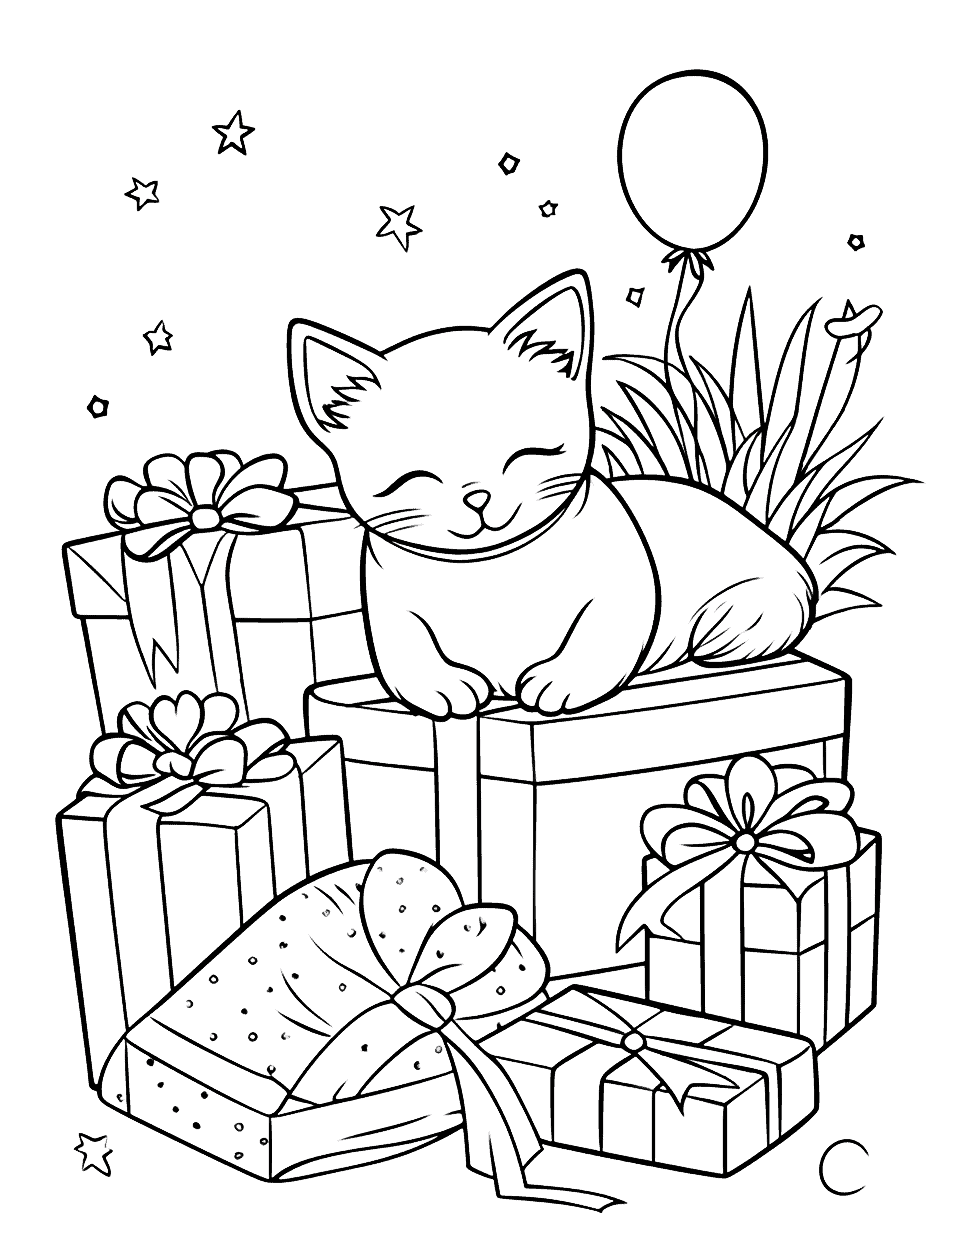 Cat's Birthday Nap Happy Coloring Page - A lazy cat sleeping next to a pile of birthday presents.